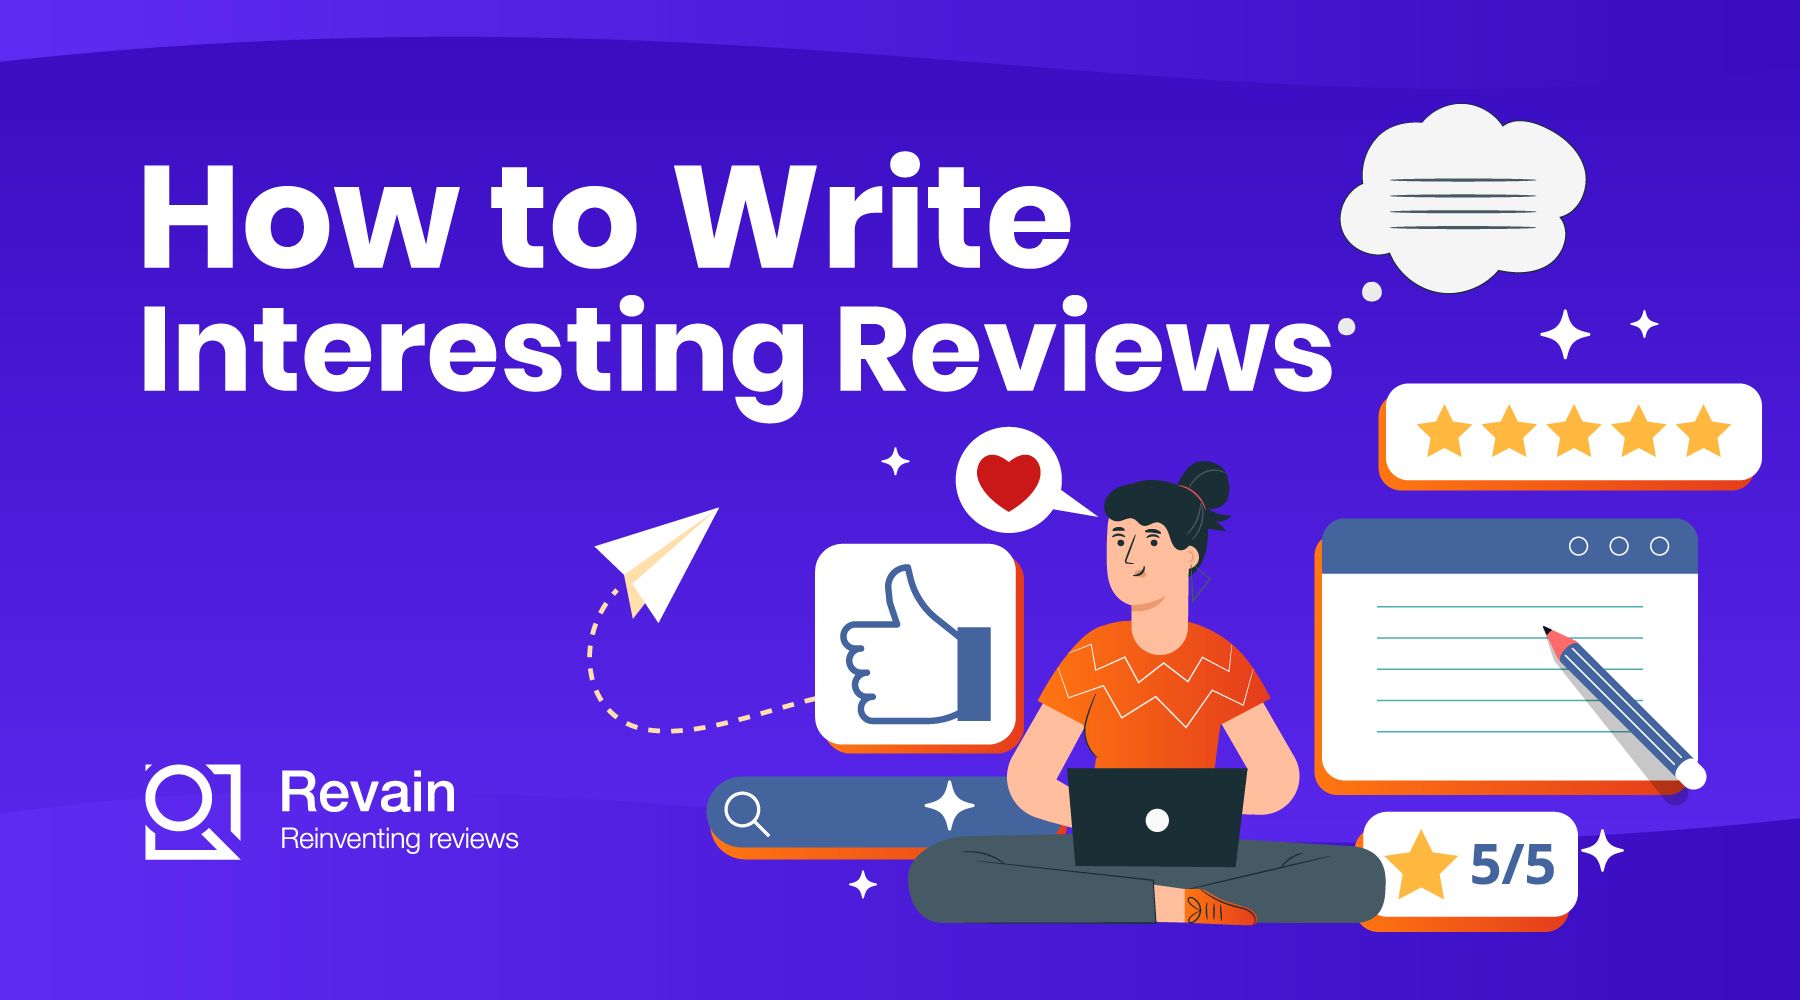 Article How to write interesting reviews